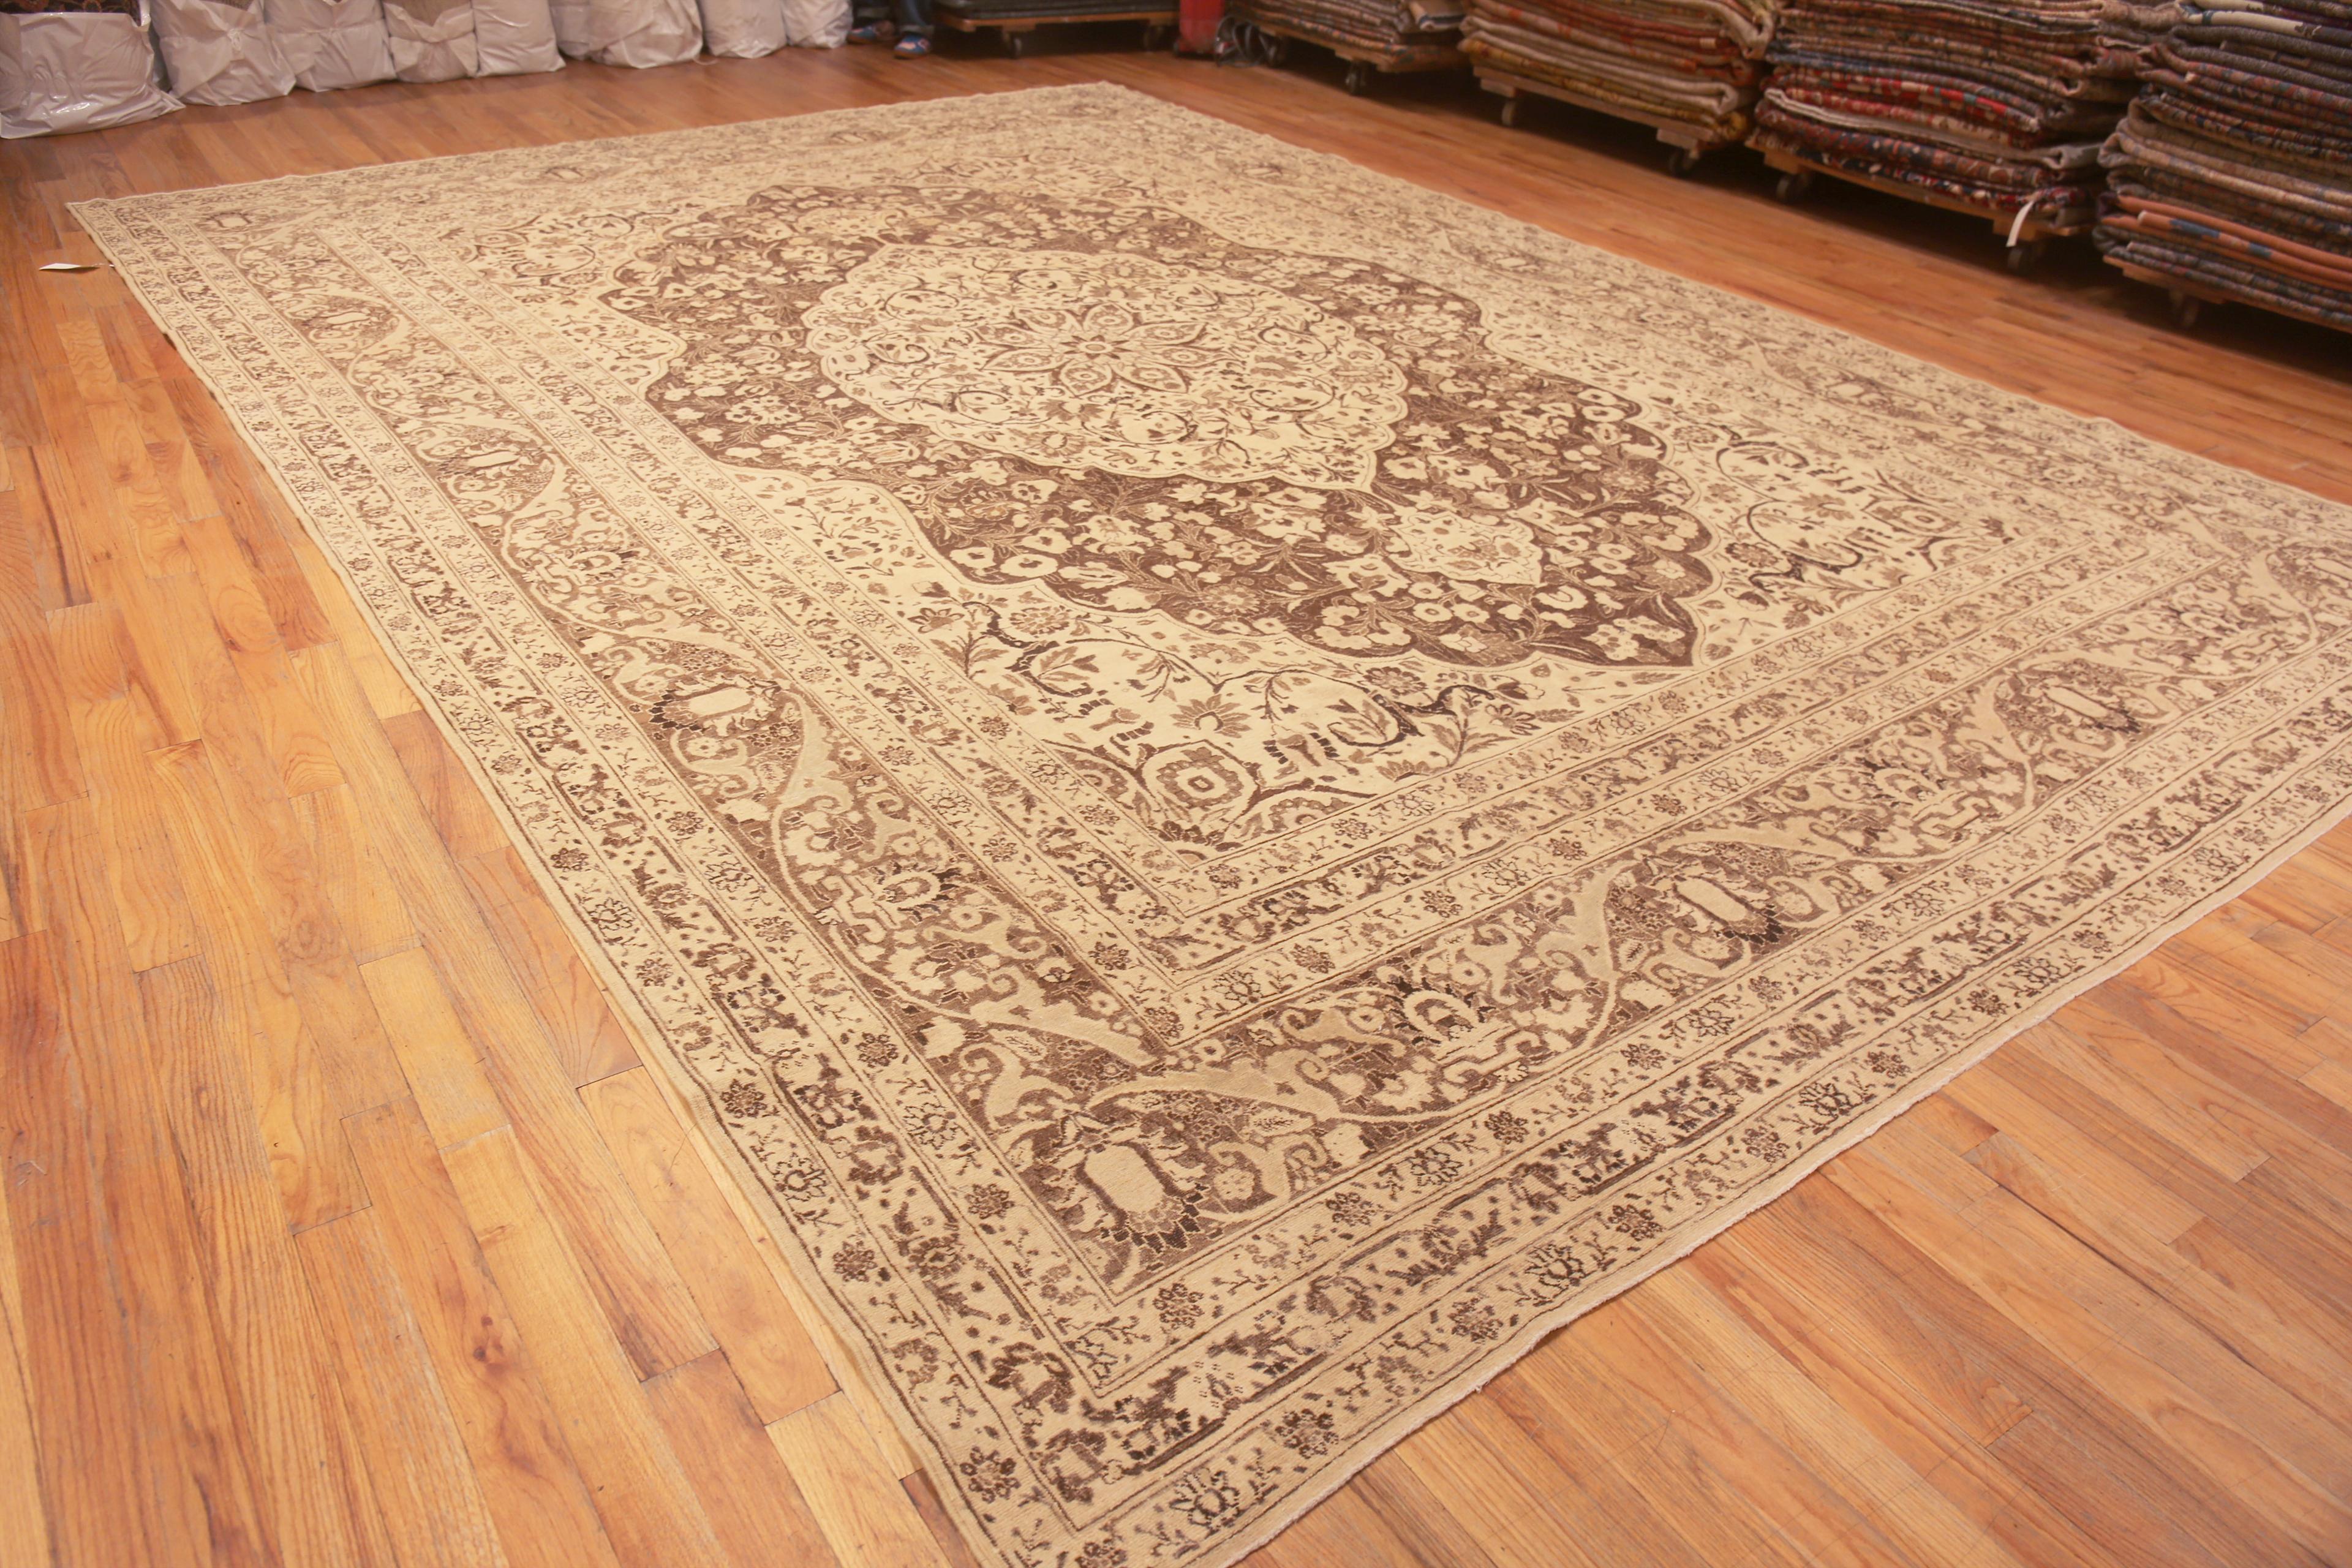 Finely Woven and Decorative Large Antique Persian Tabriz Rug, Country of Origin / Rug Type: Persia Rugs, Circa Date: First Quarter of The 20th Century. Size: 12 ft x 18 ft (3.66 m x 5.49 m)

